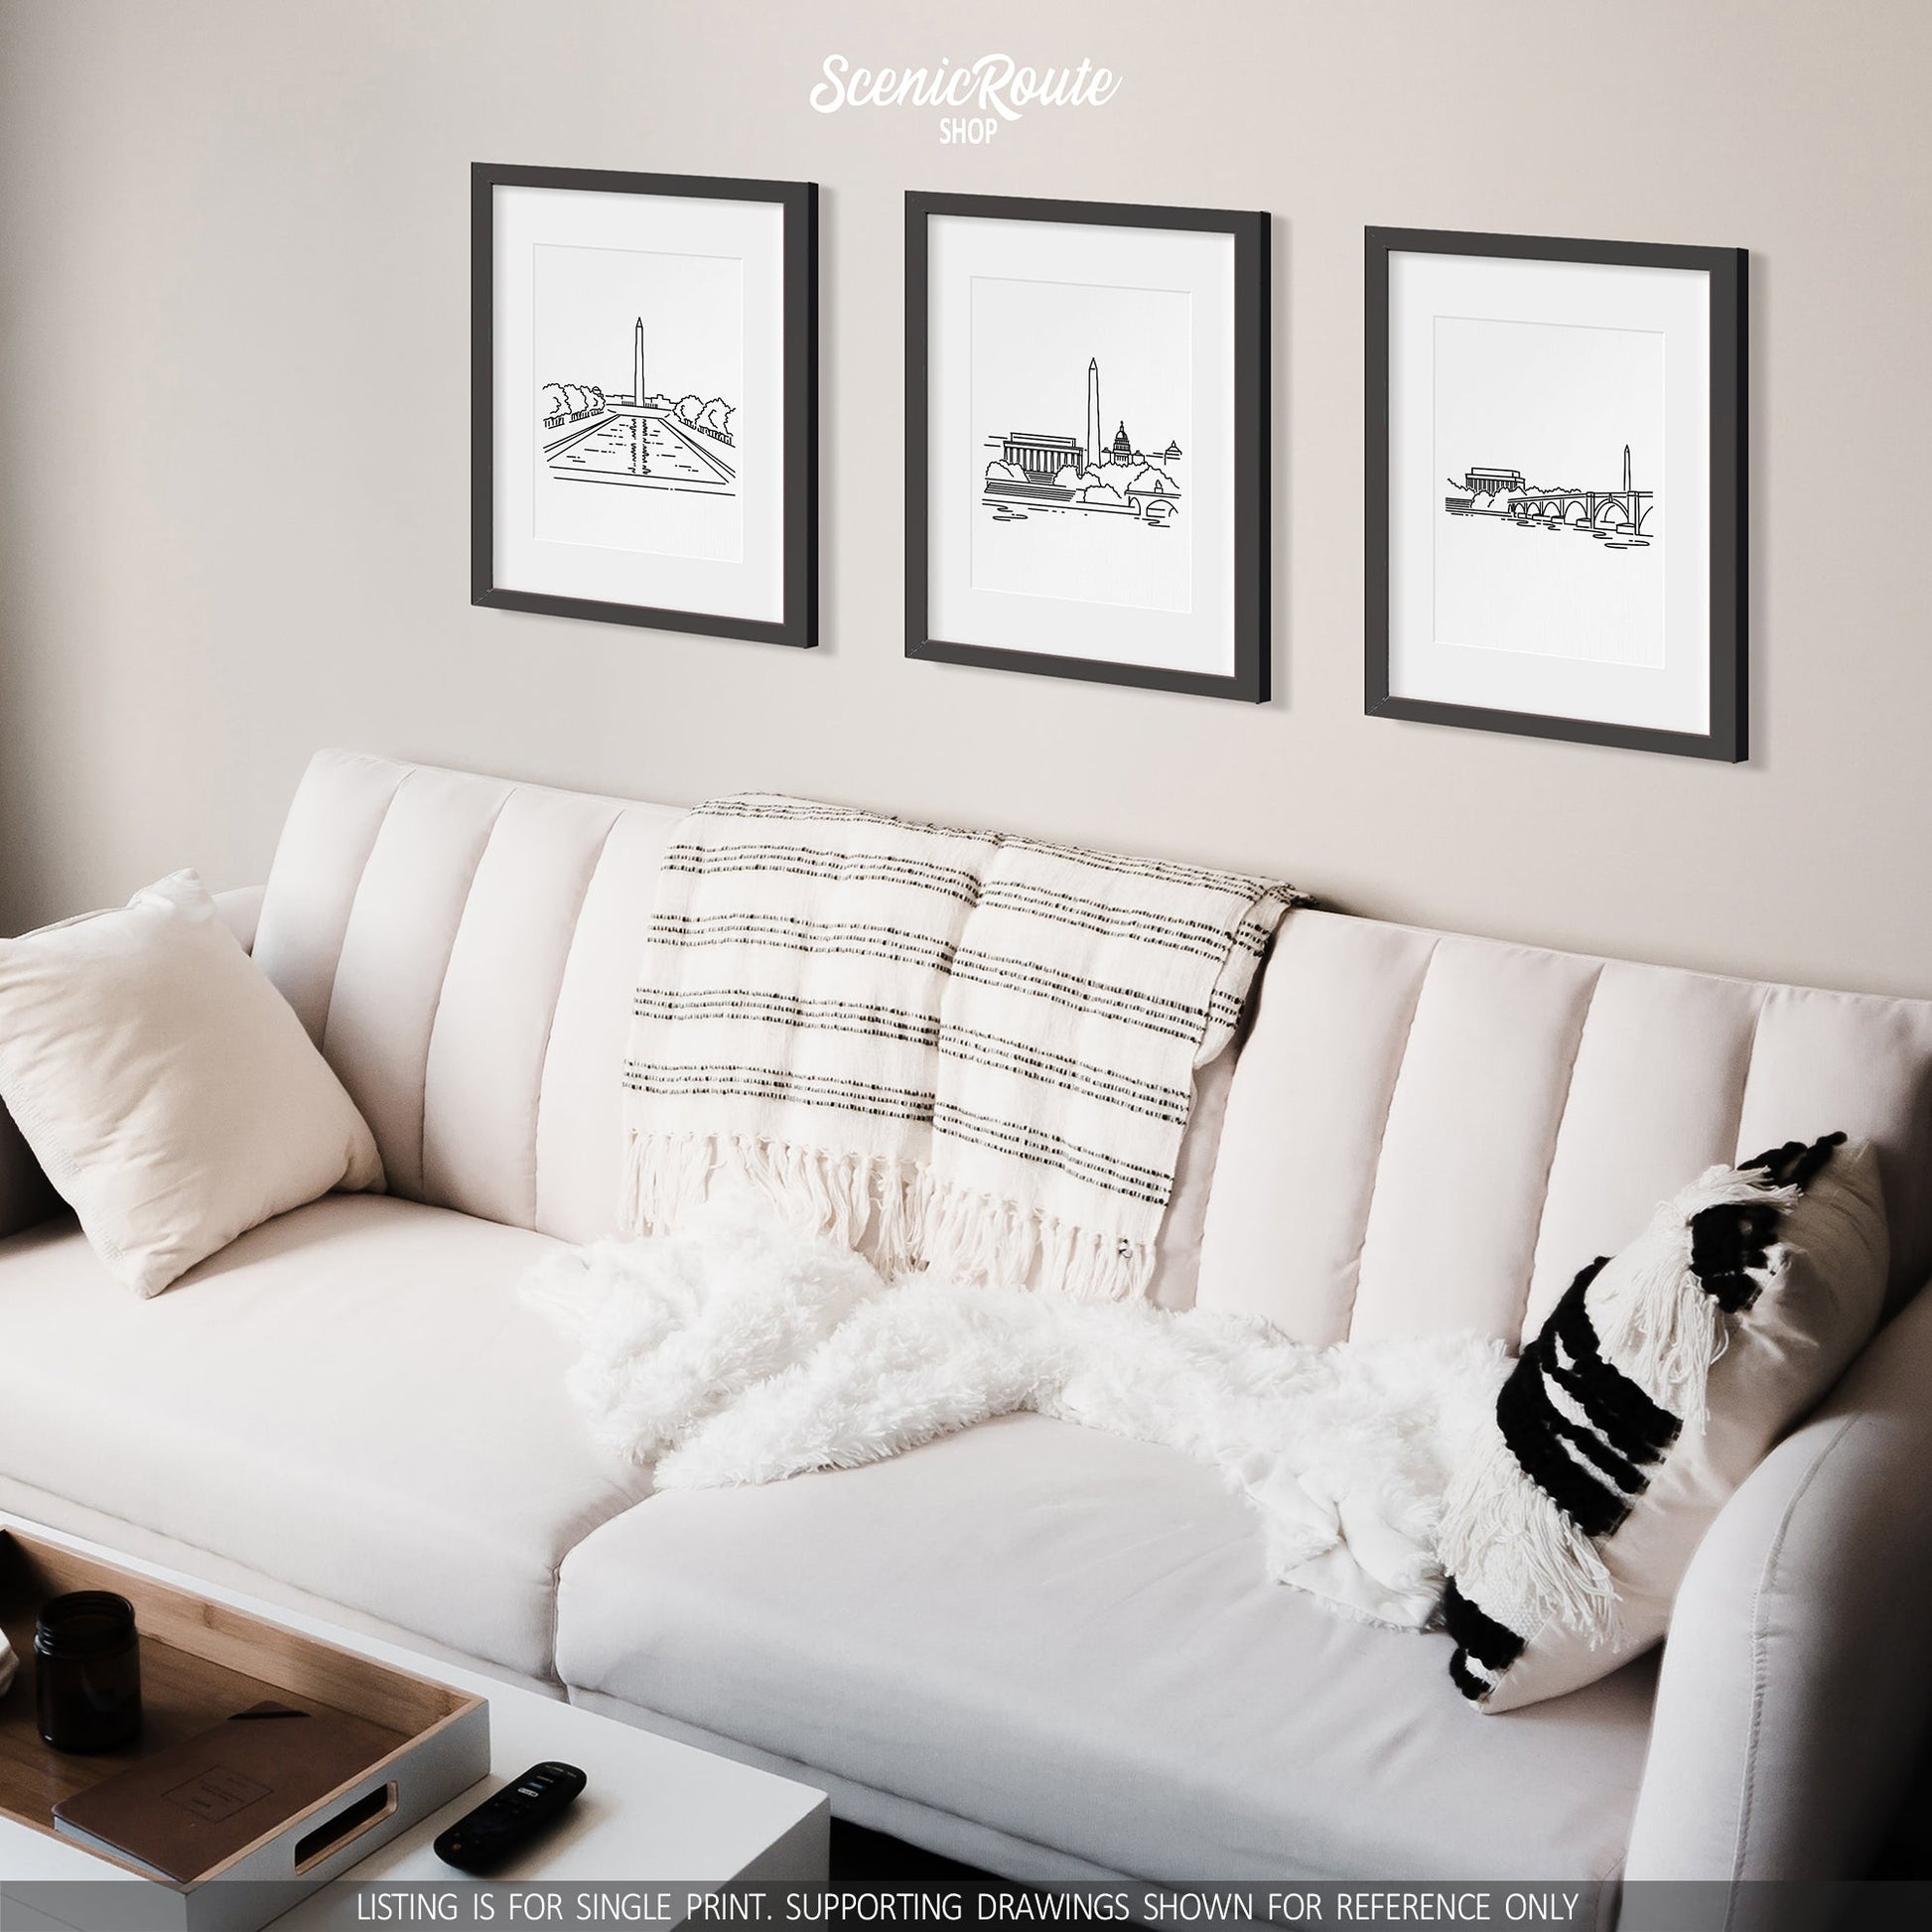 A group of three framed drawings on a white wall hanging above a couch with pillows and a blanket. The line art drawings include the National Mall, Washington DC Skyline, and Lincoln Memorial